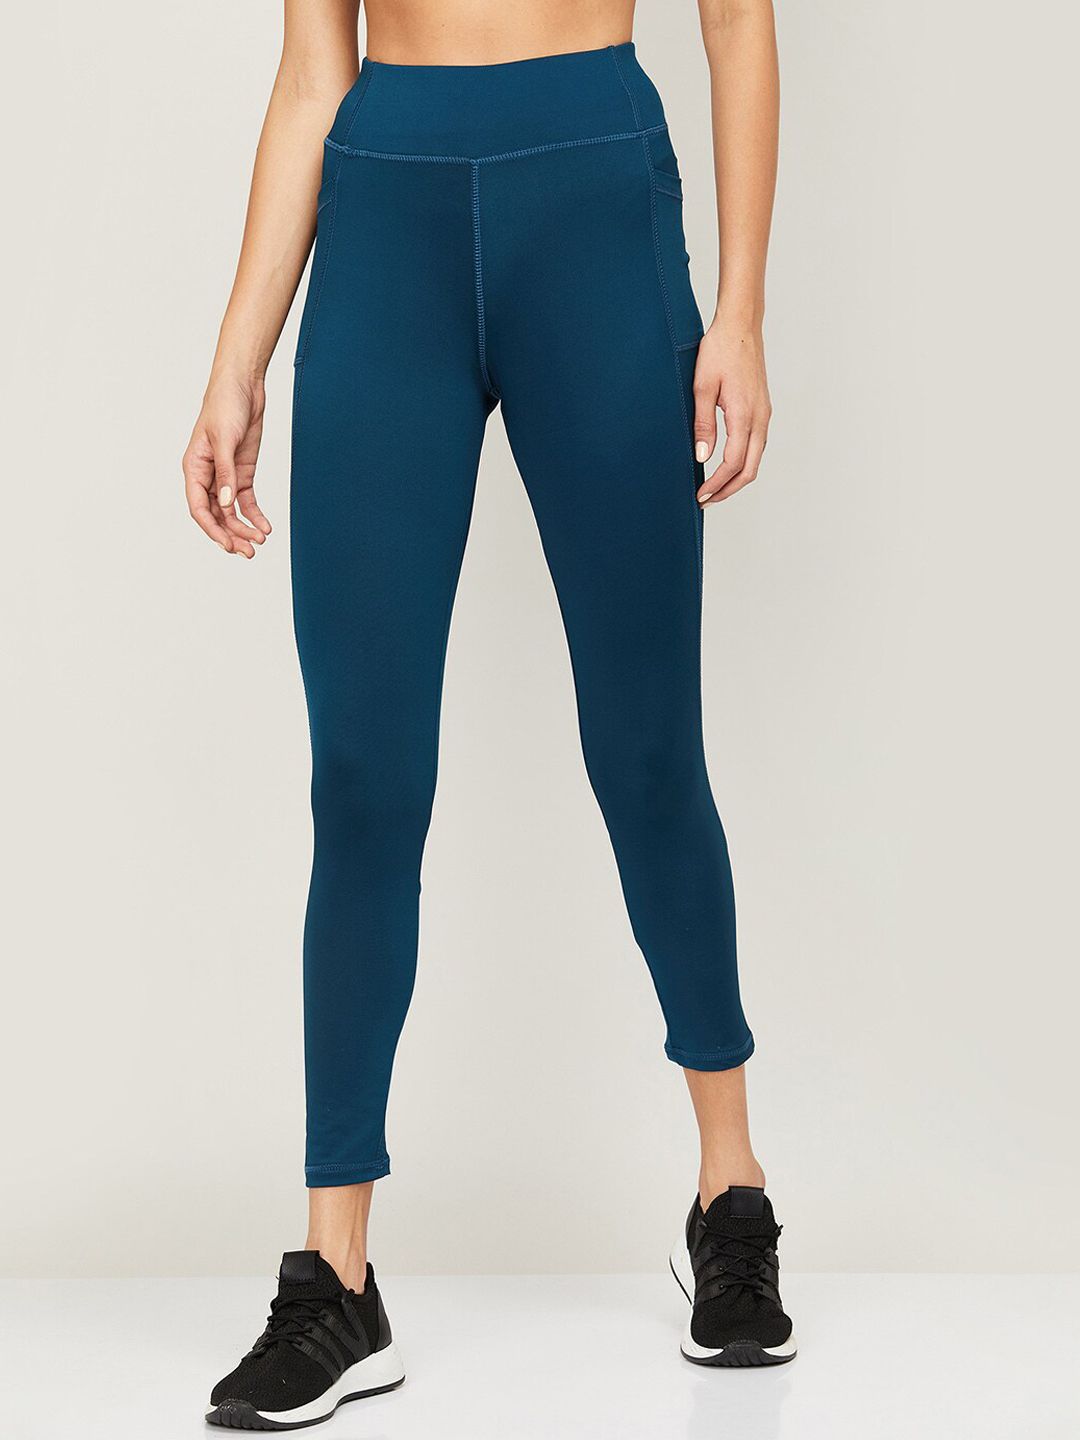 Kappa Women Teal Blue Solid Tights Price in India